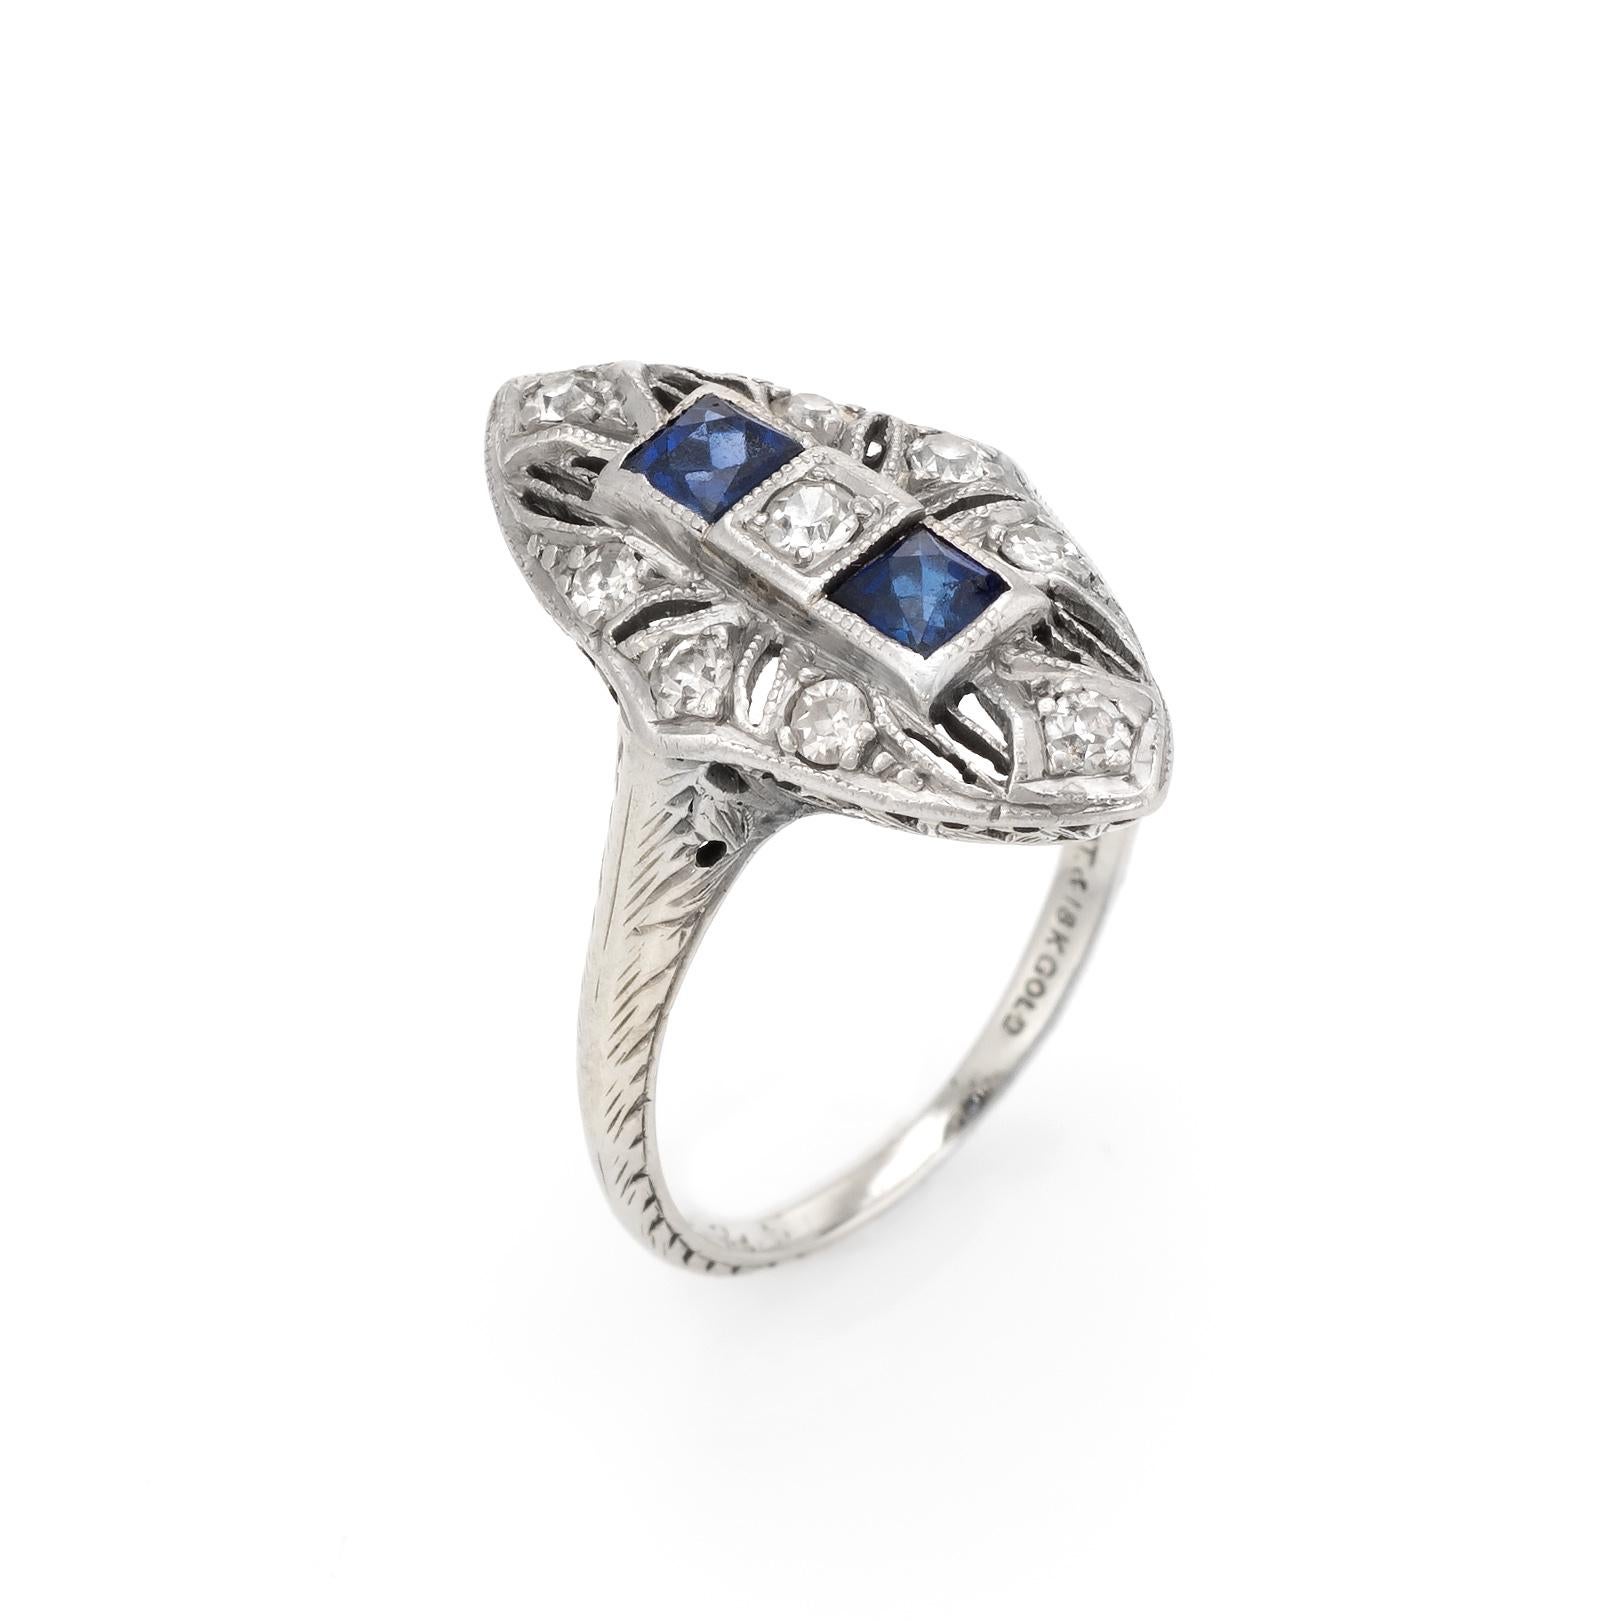 Finely detailed vintage Art Deco era cocktail ring (circa 1920s to 1930s), crafted in 900 platinum & 18 karat white gold. 

Centrally mounted estimated 0.04 carat old single cut diamonds is accented with a further 8 estimated 0.02 carat single cut